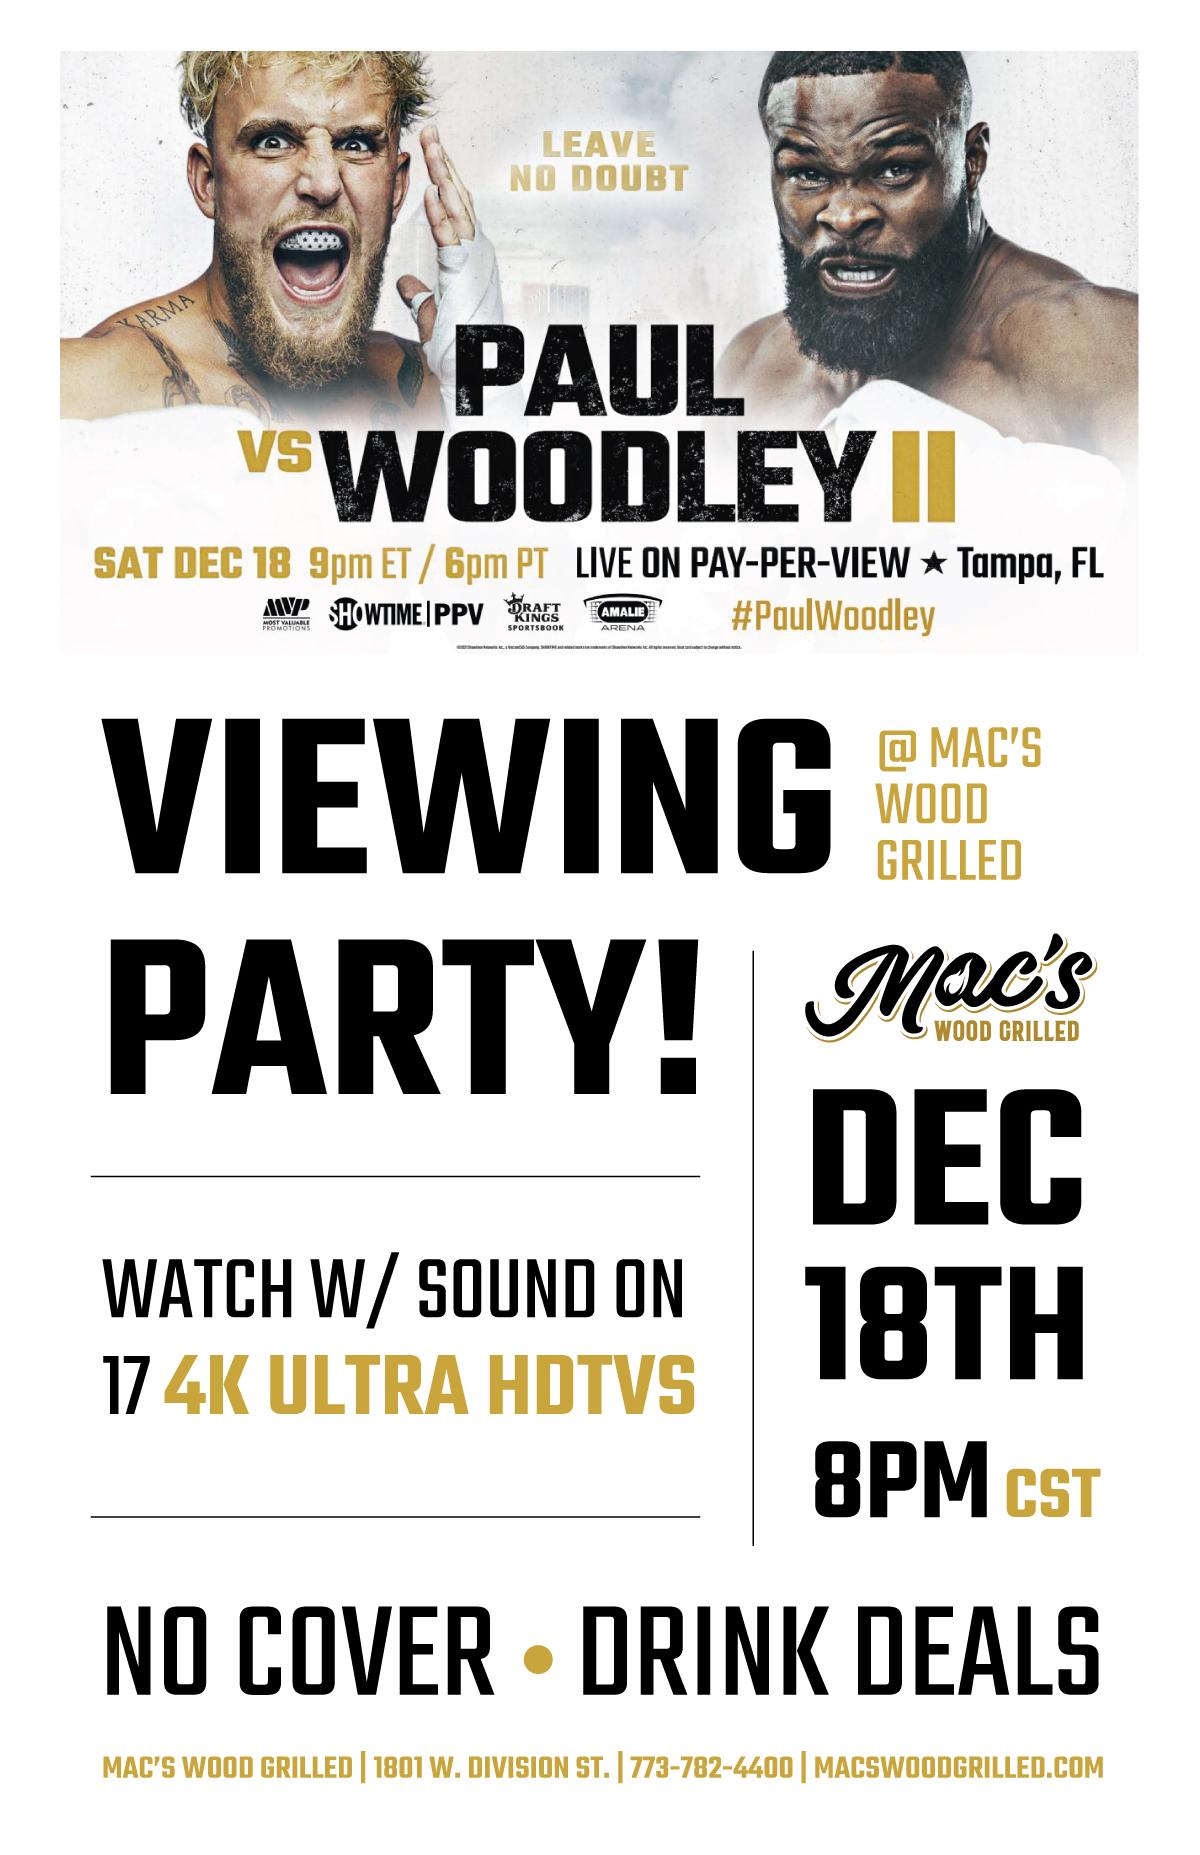 Paul vs Woodley II Viewing Party at Mac’s Wood Grilled